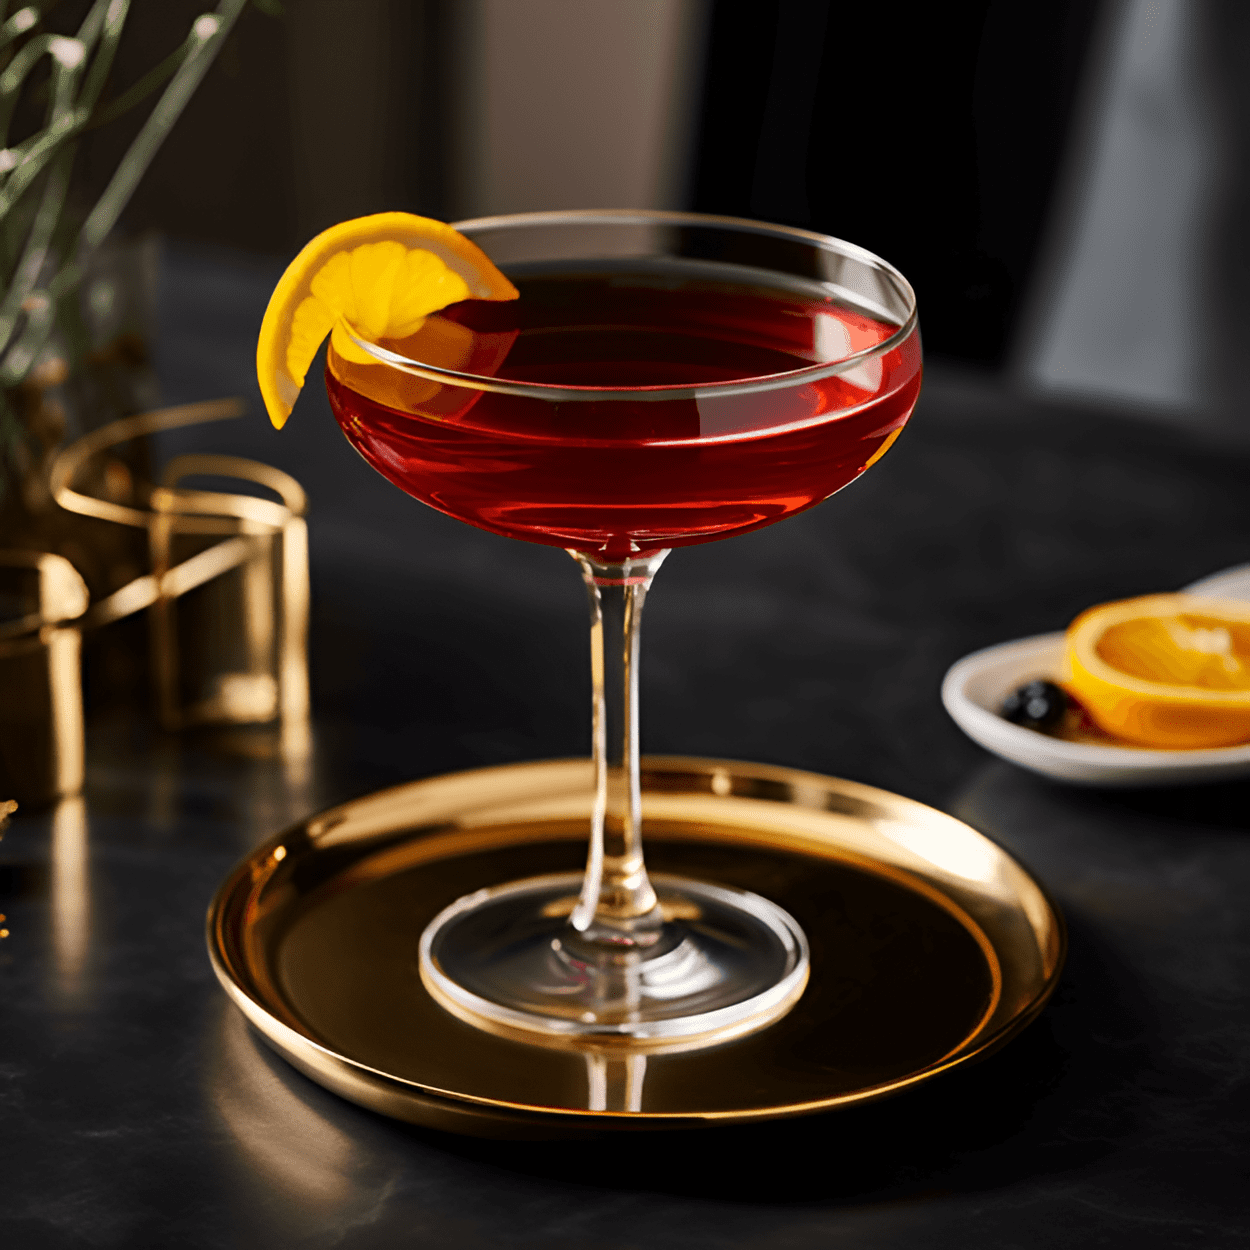 Taylor Port Mixed Cocktail Recipe - This cocktail has a rich, full-bodied taste with a hint of sweetness from the port. The spirits add a strong, robust flavor that balances the sweetness, resulting in a complex and satisfying drink.